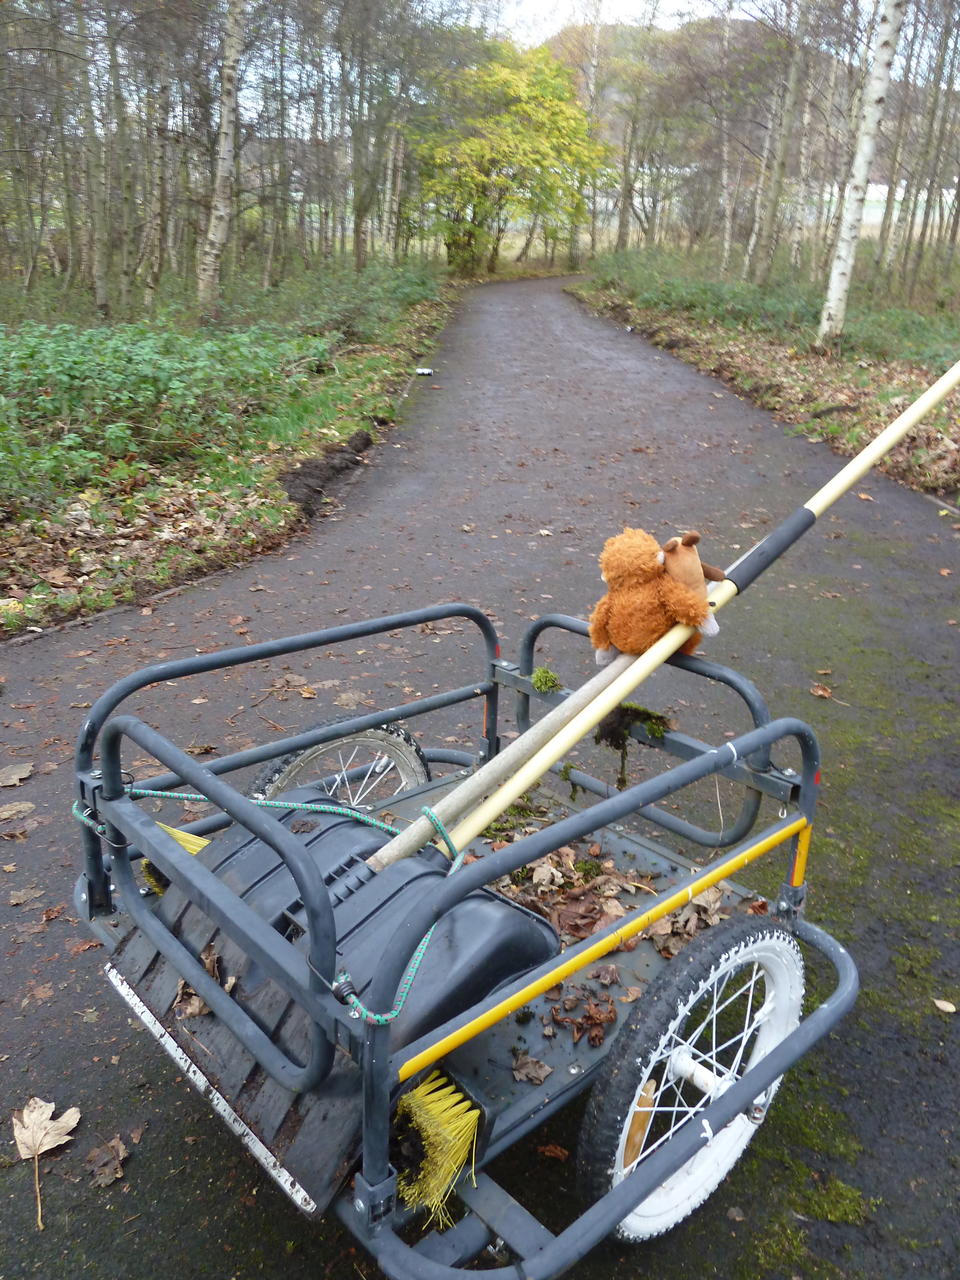 A bicycle trailer with the shovel on it; Mouse and Pongo sit on the shovel and look at the clean path